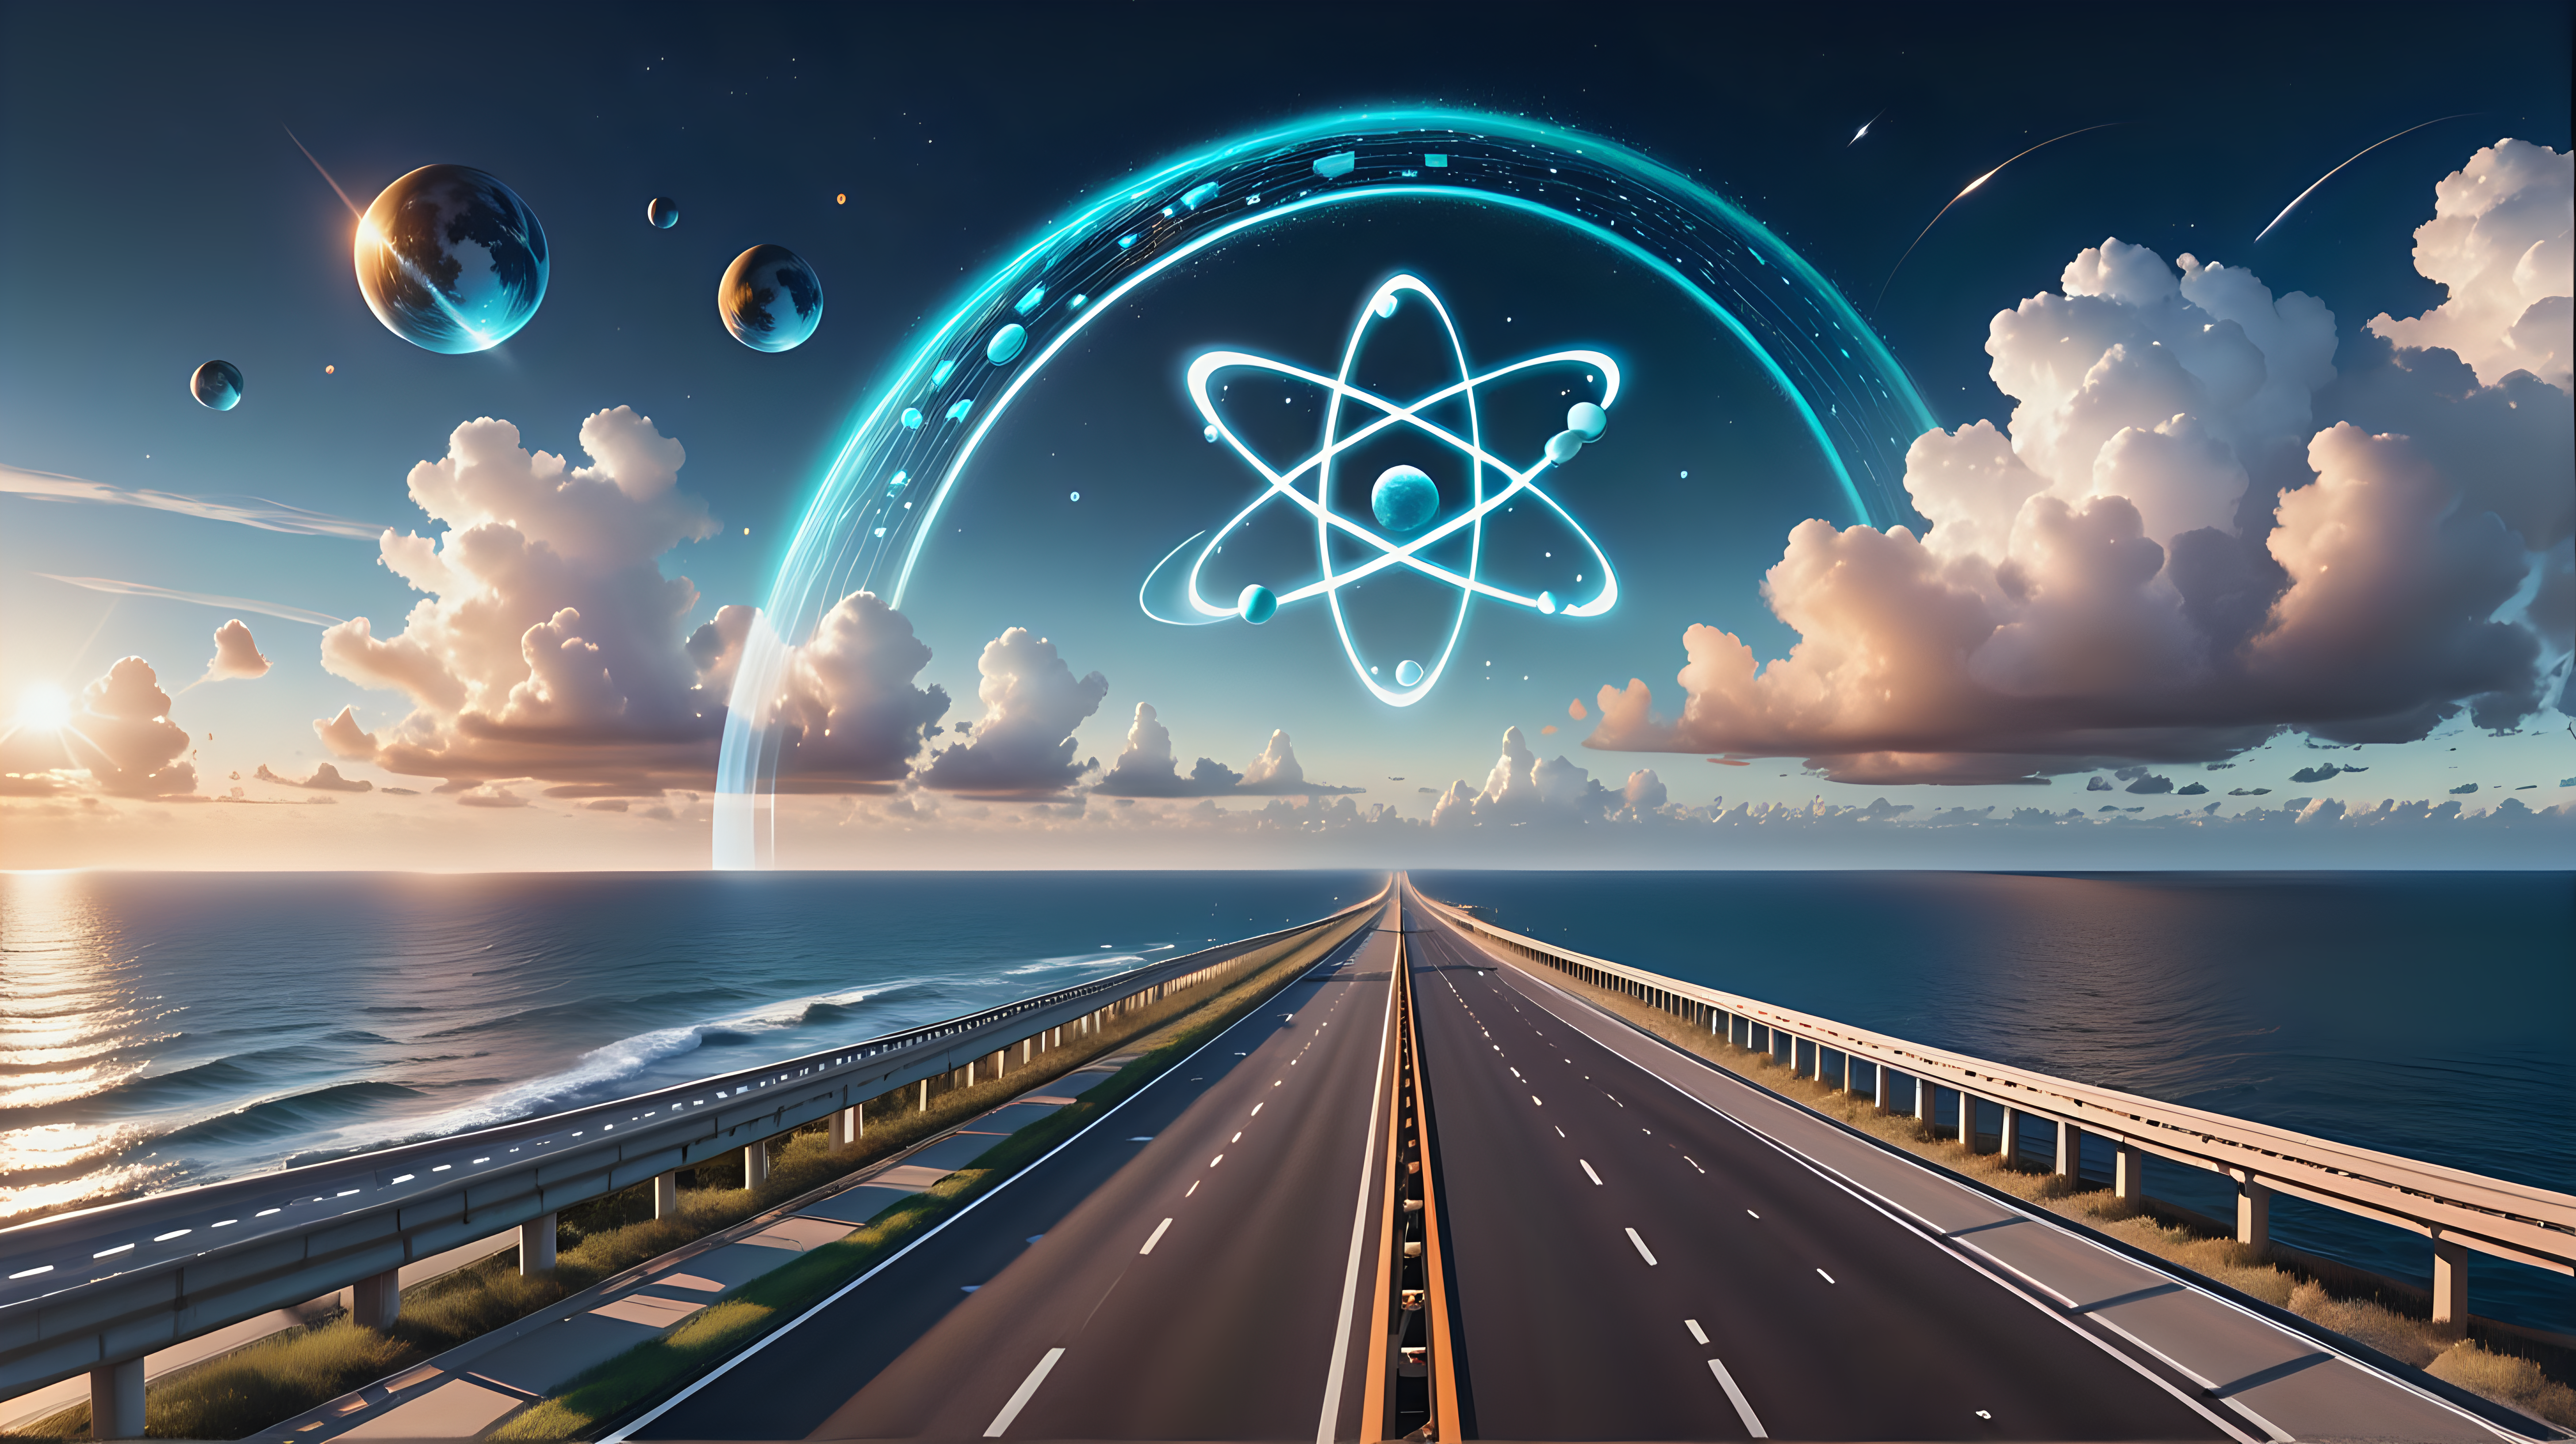 symbols of science in the sky over a highway running across land and the ocean
